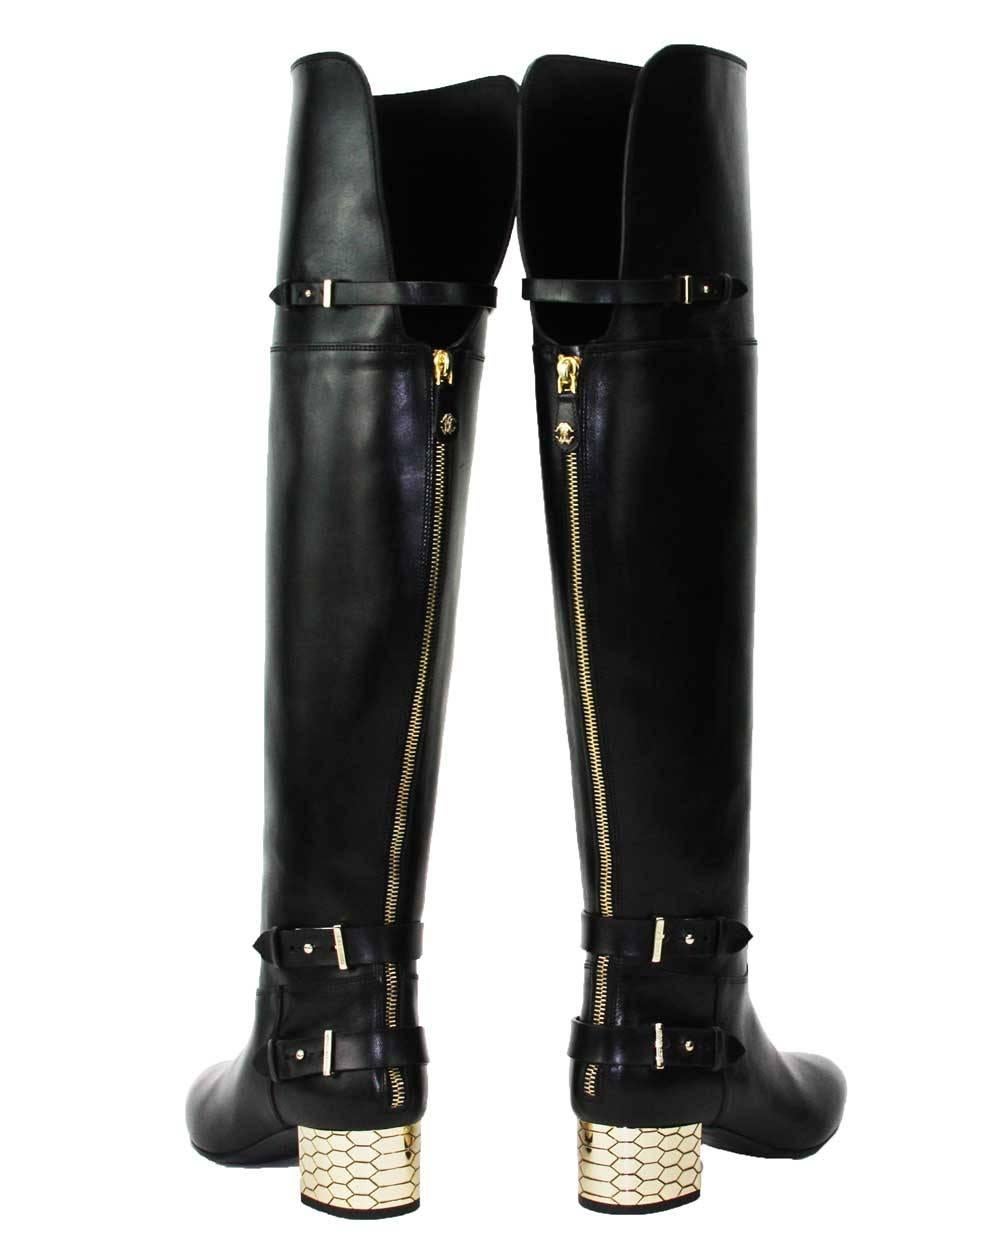 Black New Roberto Cavalli Over-the-knee Leather Boots Honeycomb Pattern Heel 36.5  6.5 For Sale